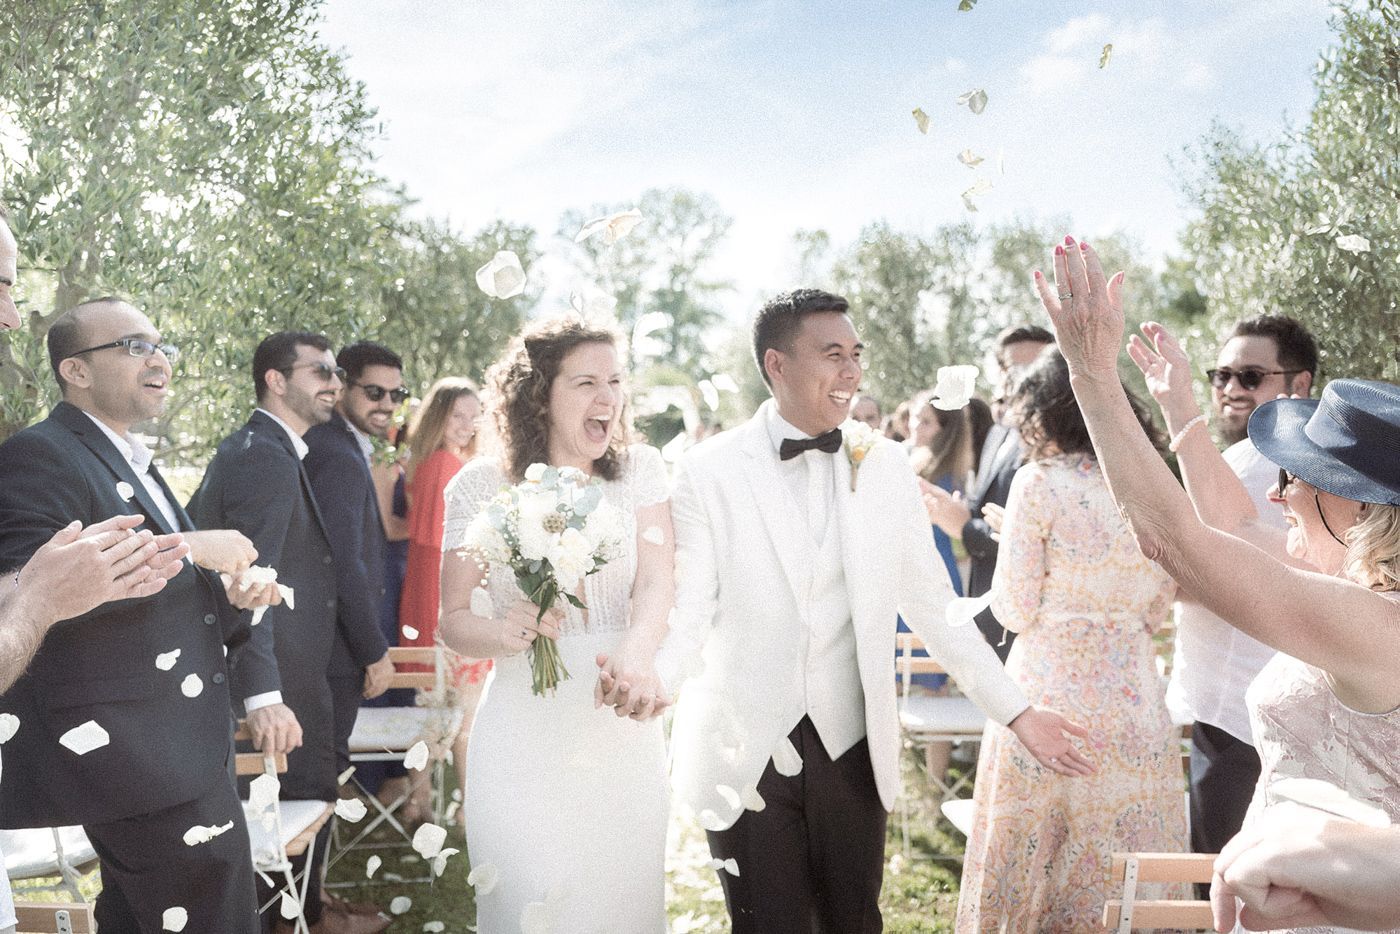 A couple walk through confetti after their wedding ceremony in Provence